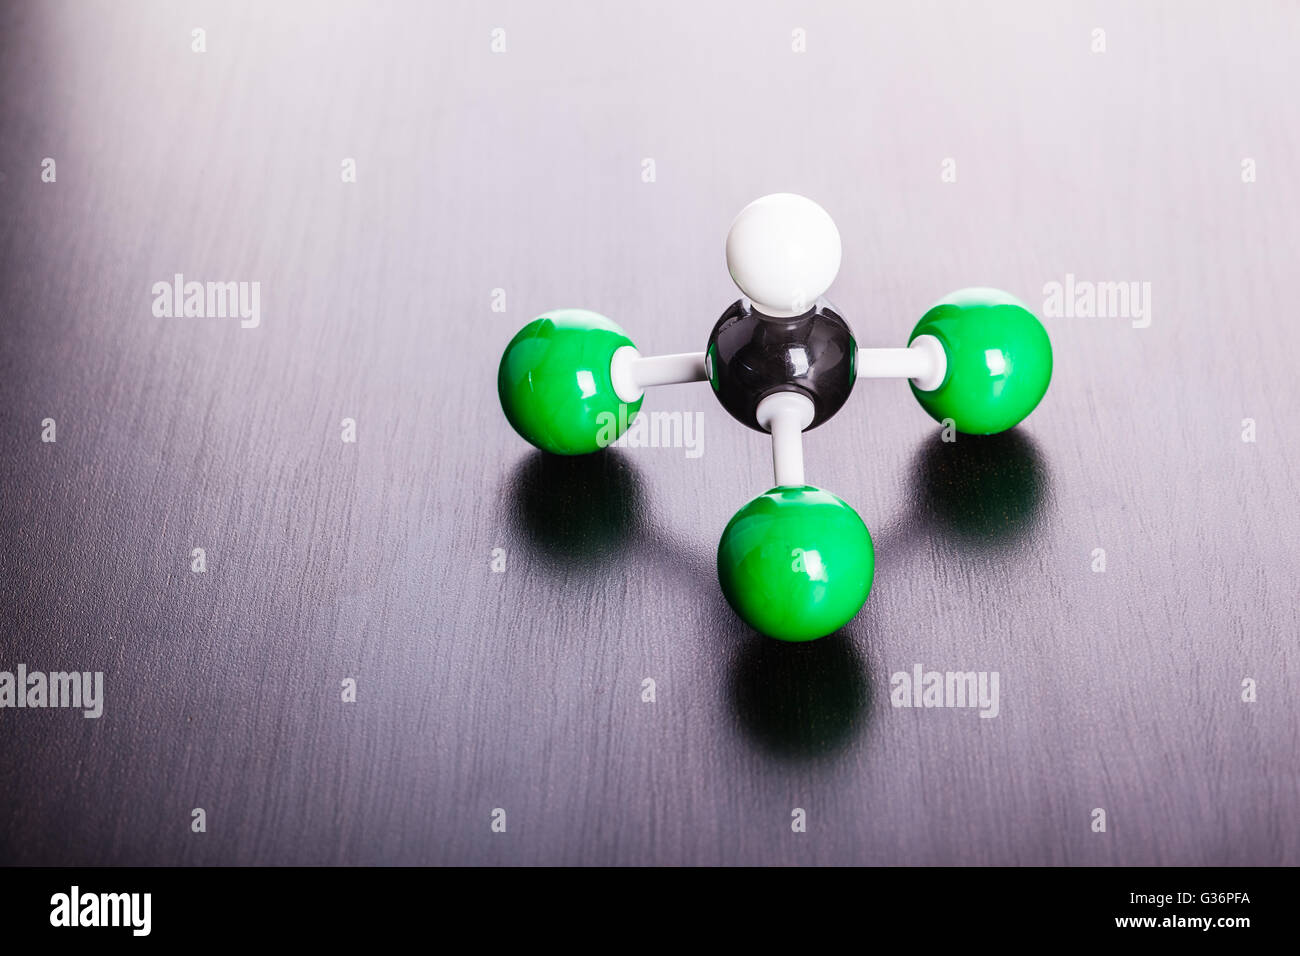 a chloroform molecule plastic chemical structure model on a wooden surface Stock Photo